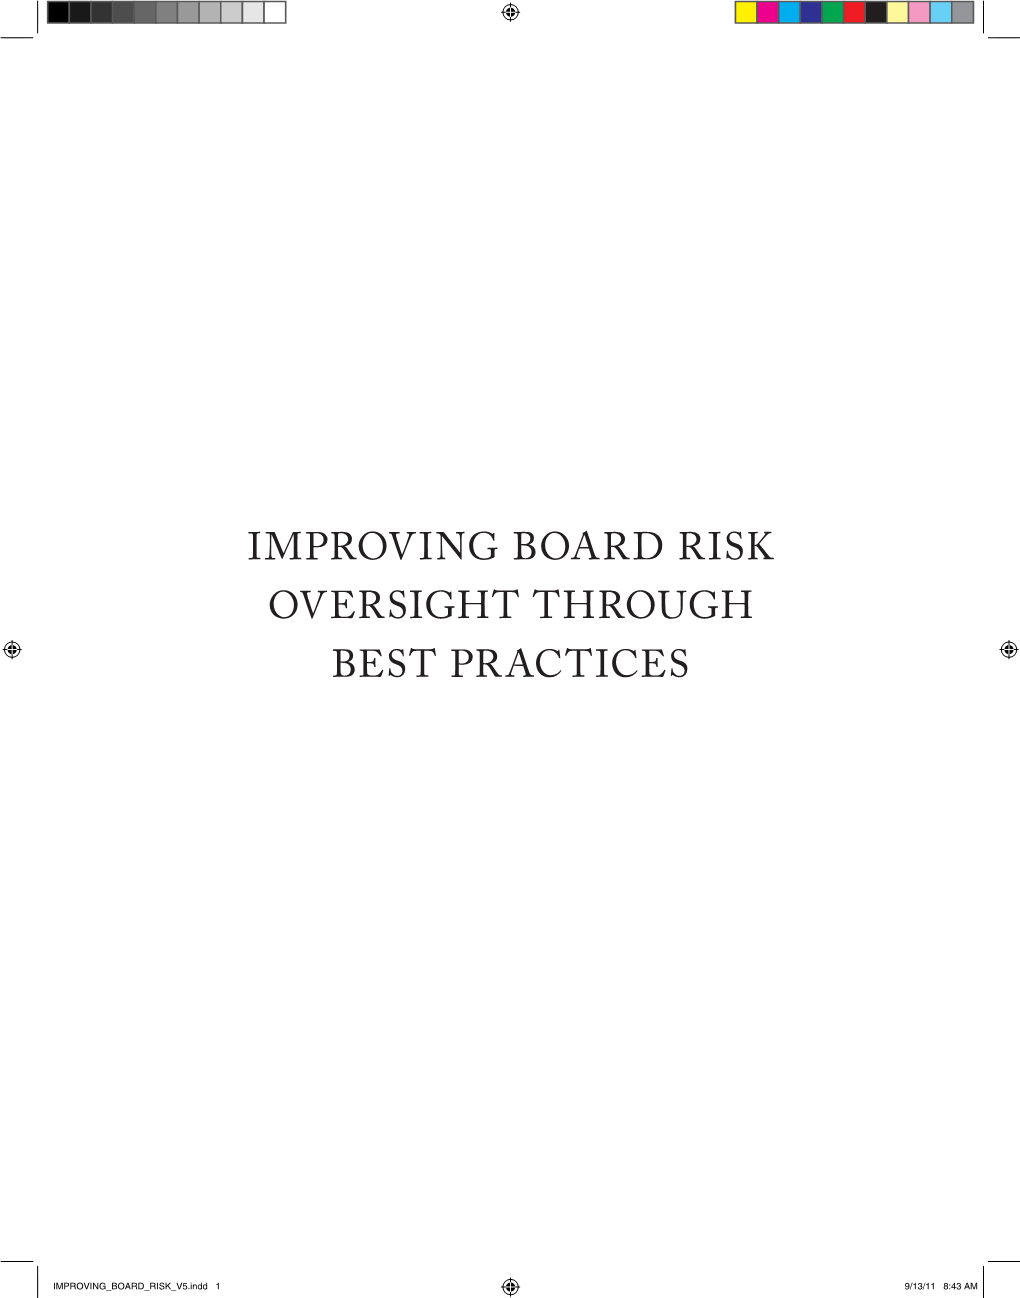 Improving Board Risk Oversight Through Best Practices